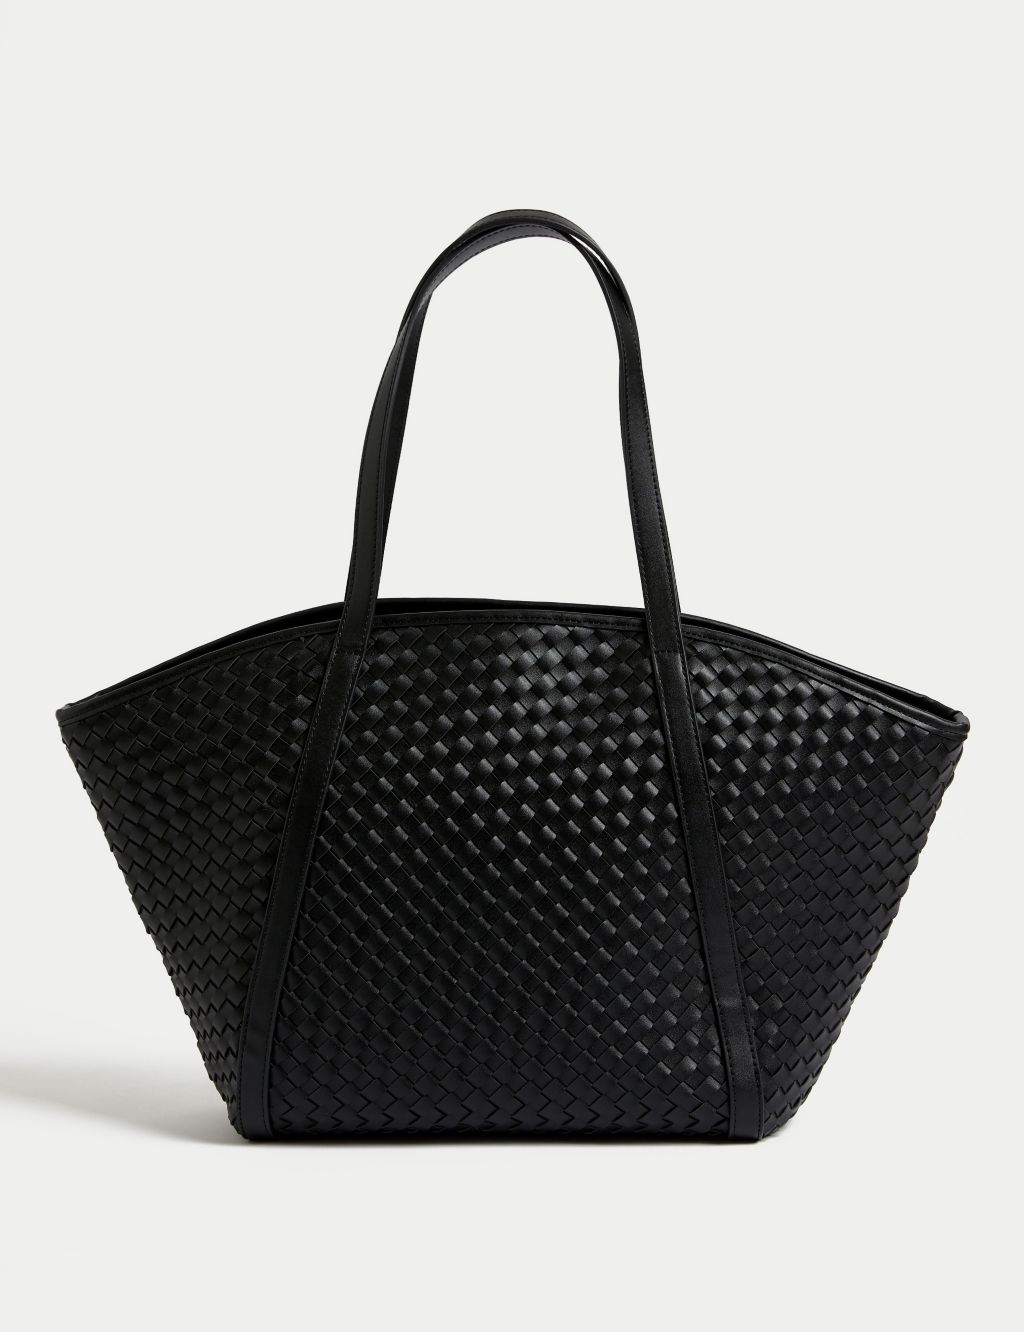 Faux Leather Woven Tote Shopper image 4